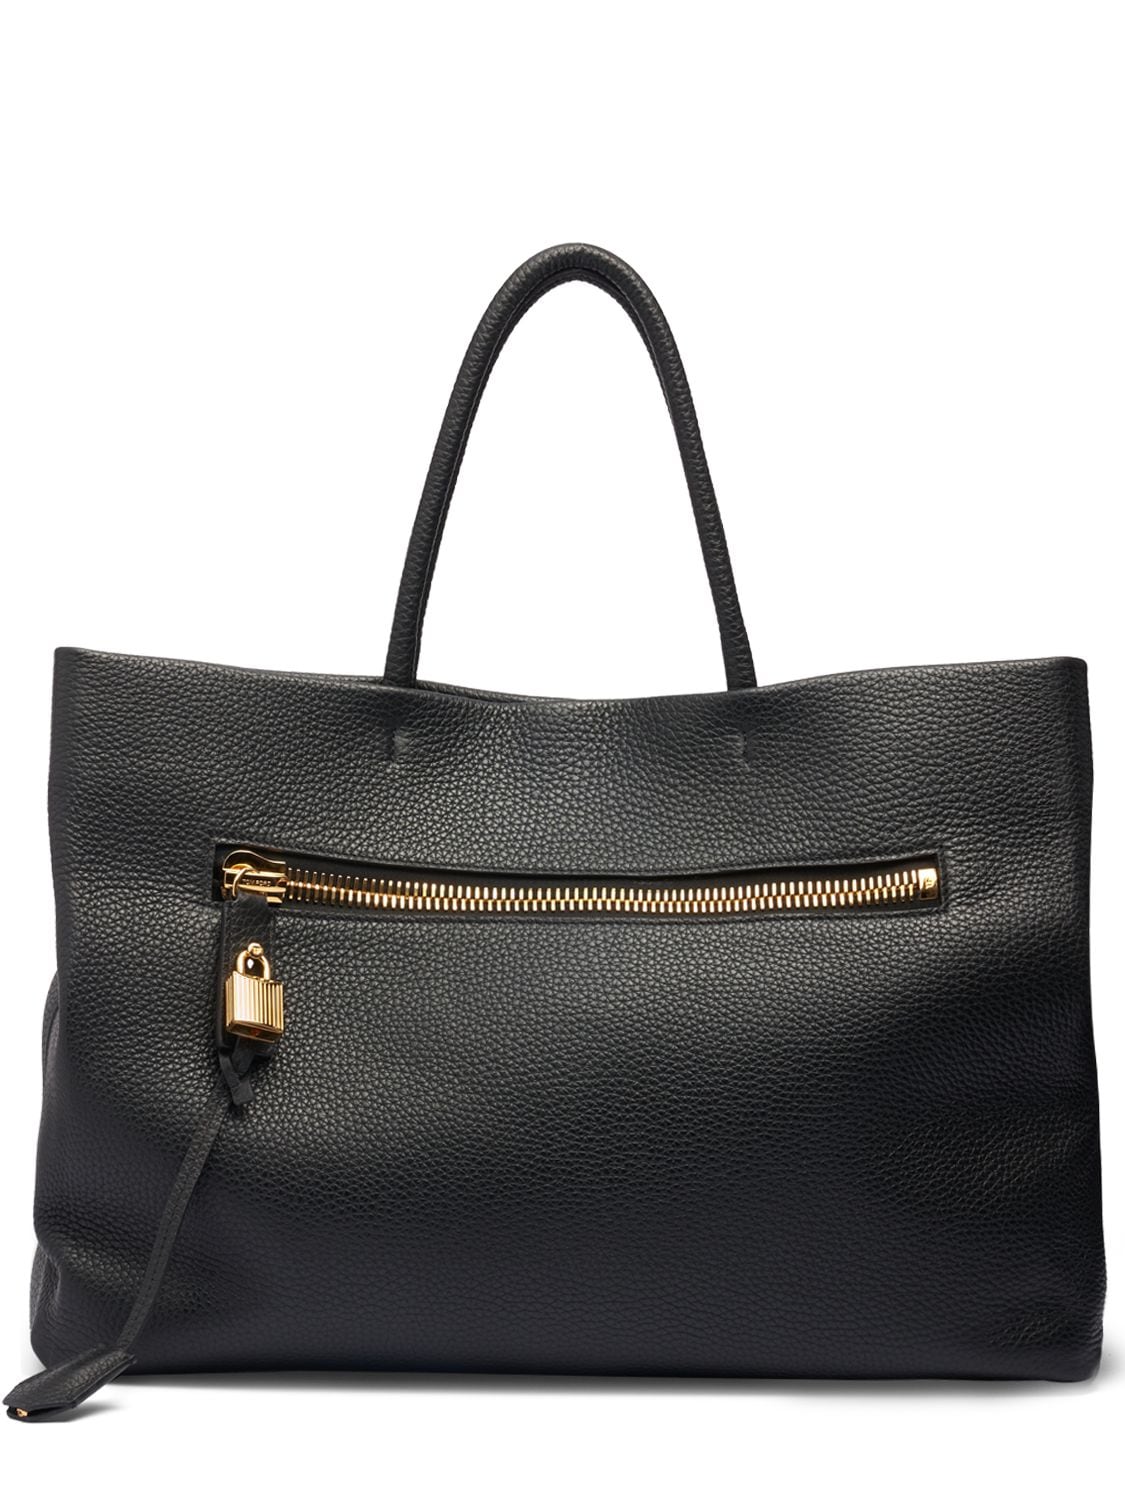 TOM FORD LARGE ALIX LEATHER TOTE BAG